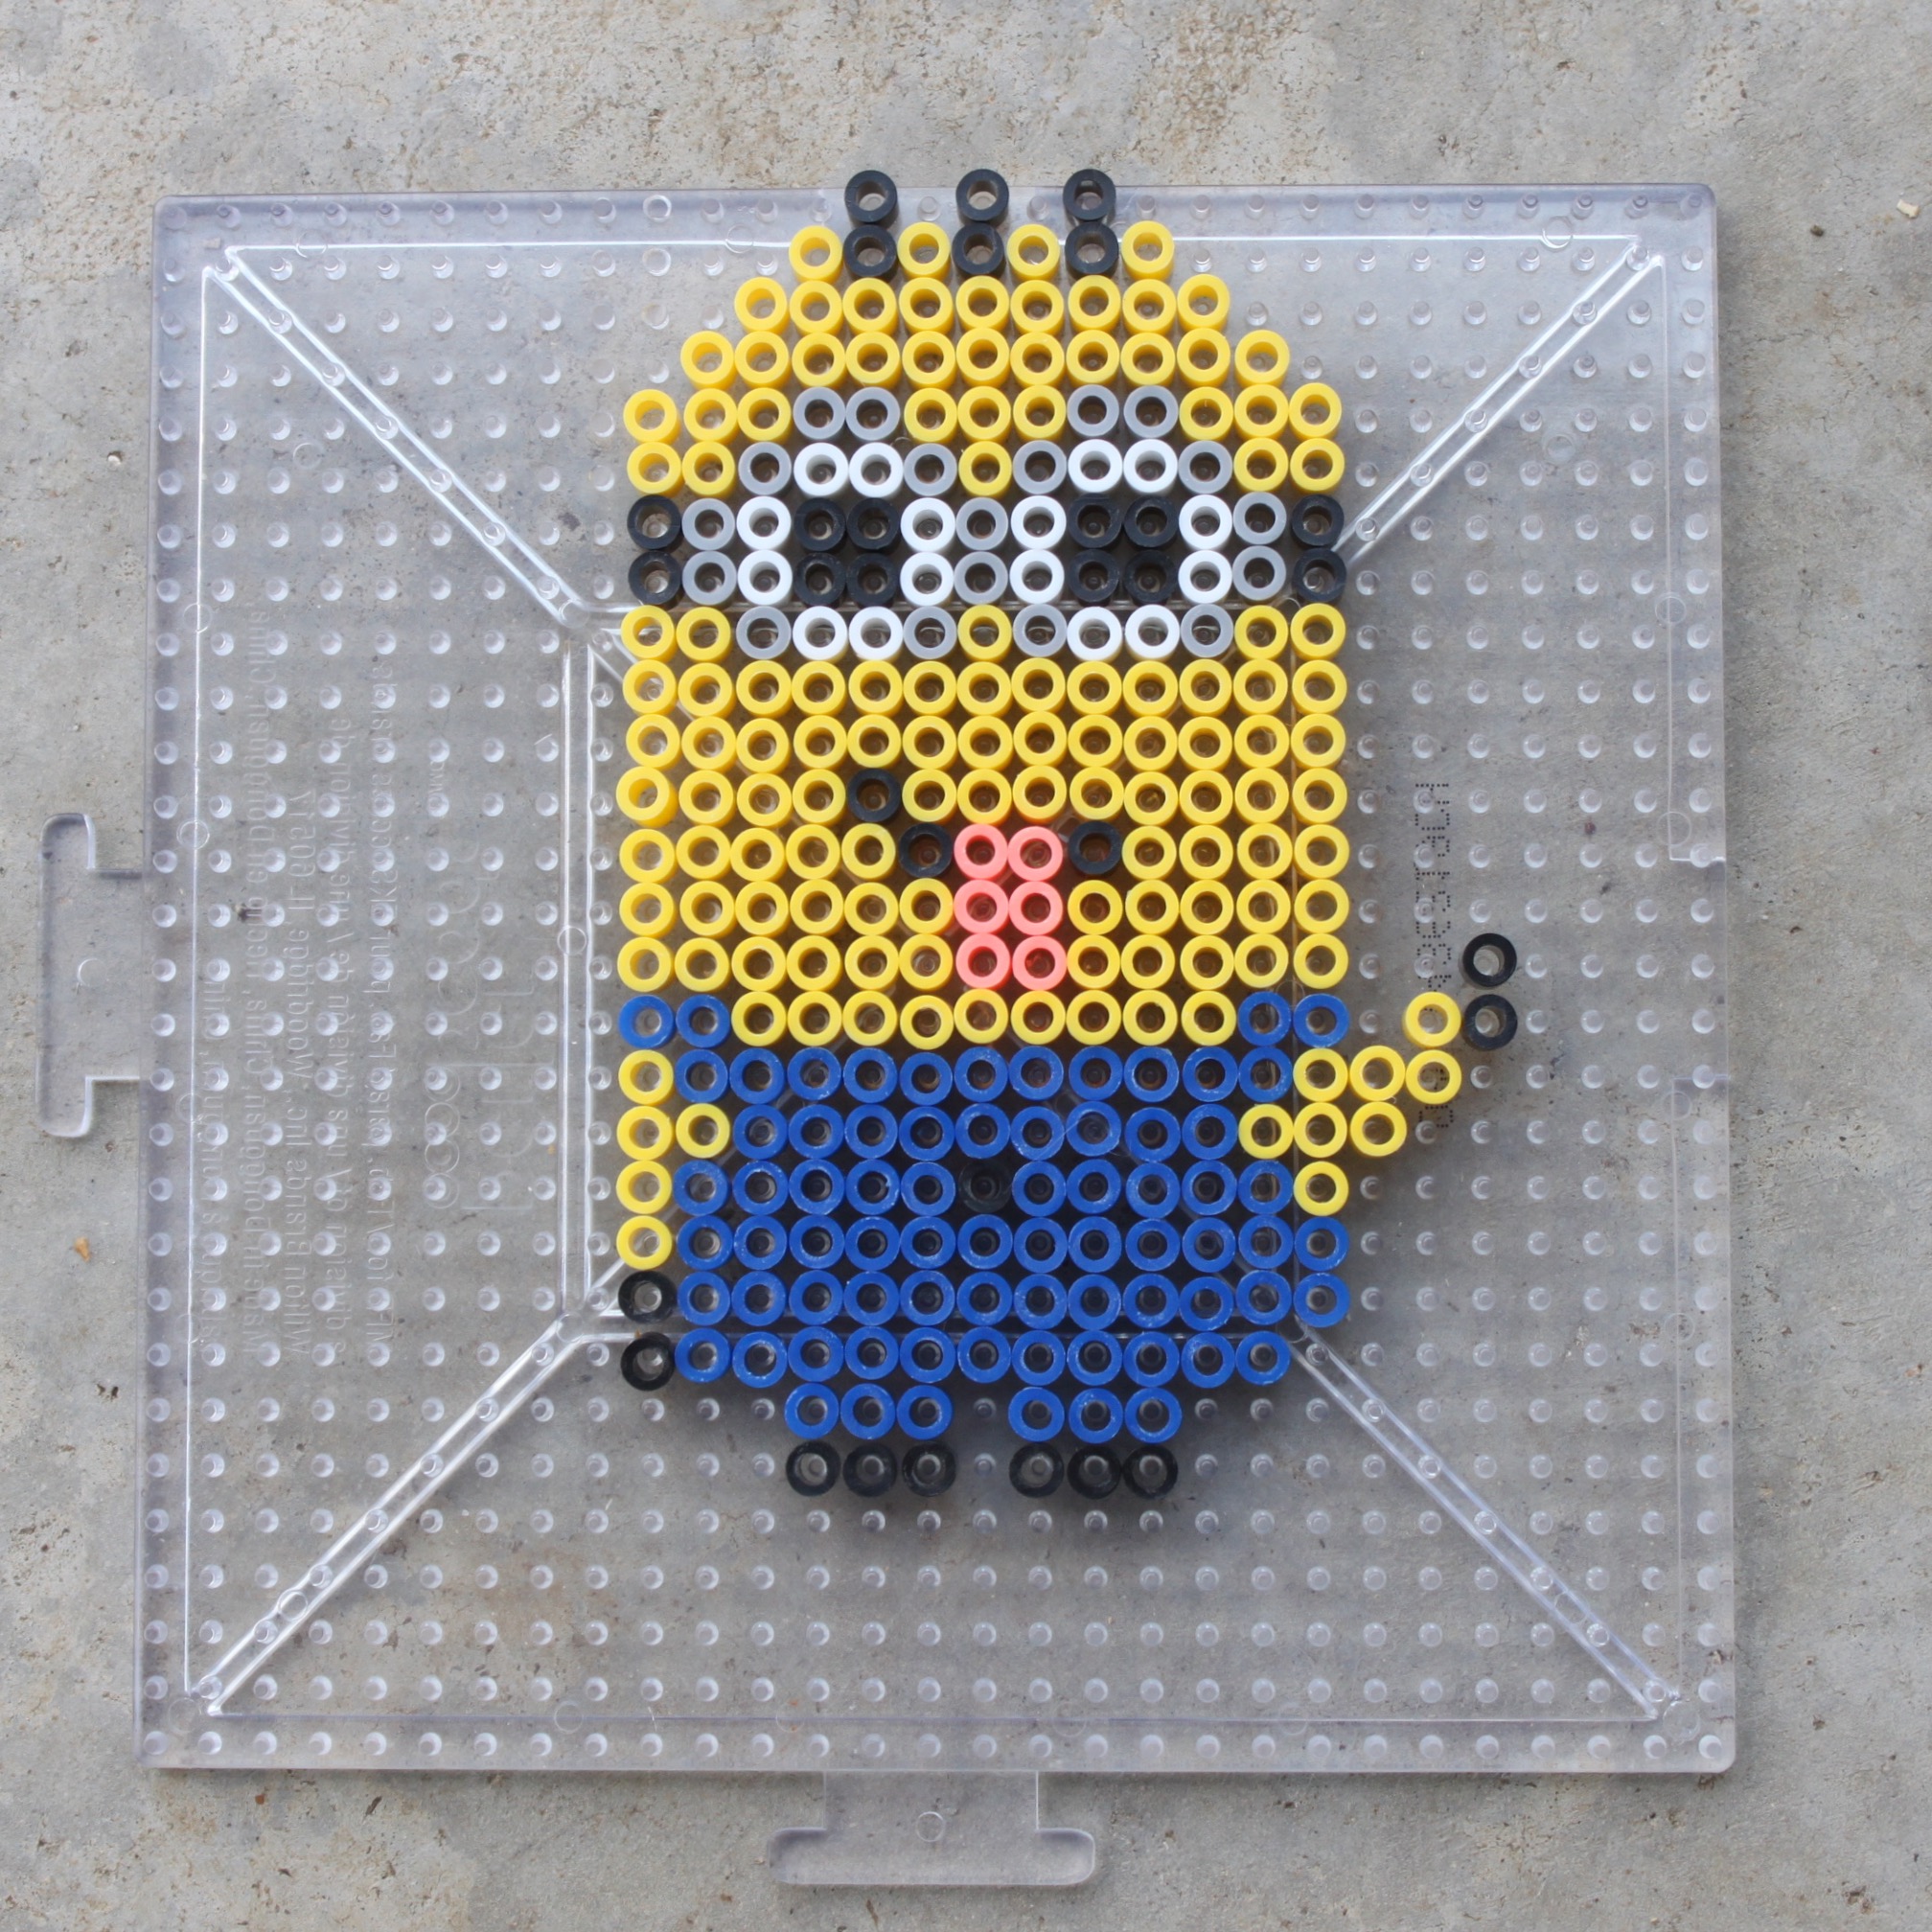 minions-perler-bead-patterns-frugal-fun-for-boys-and-girls